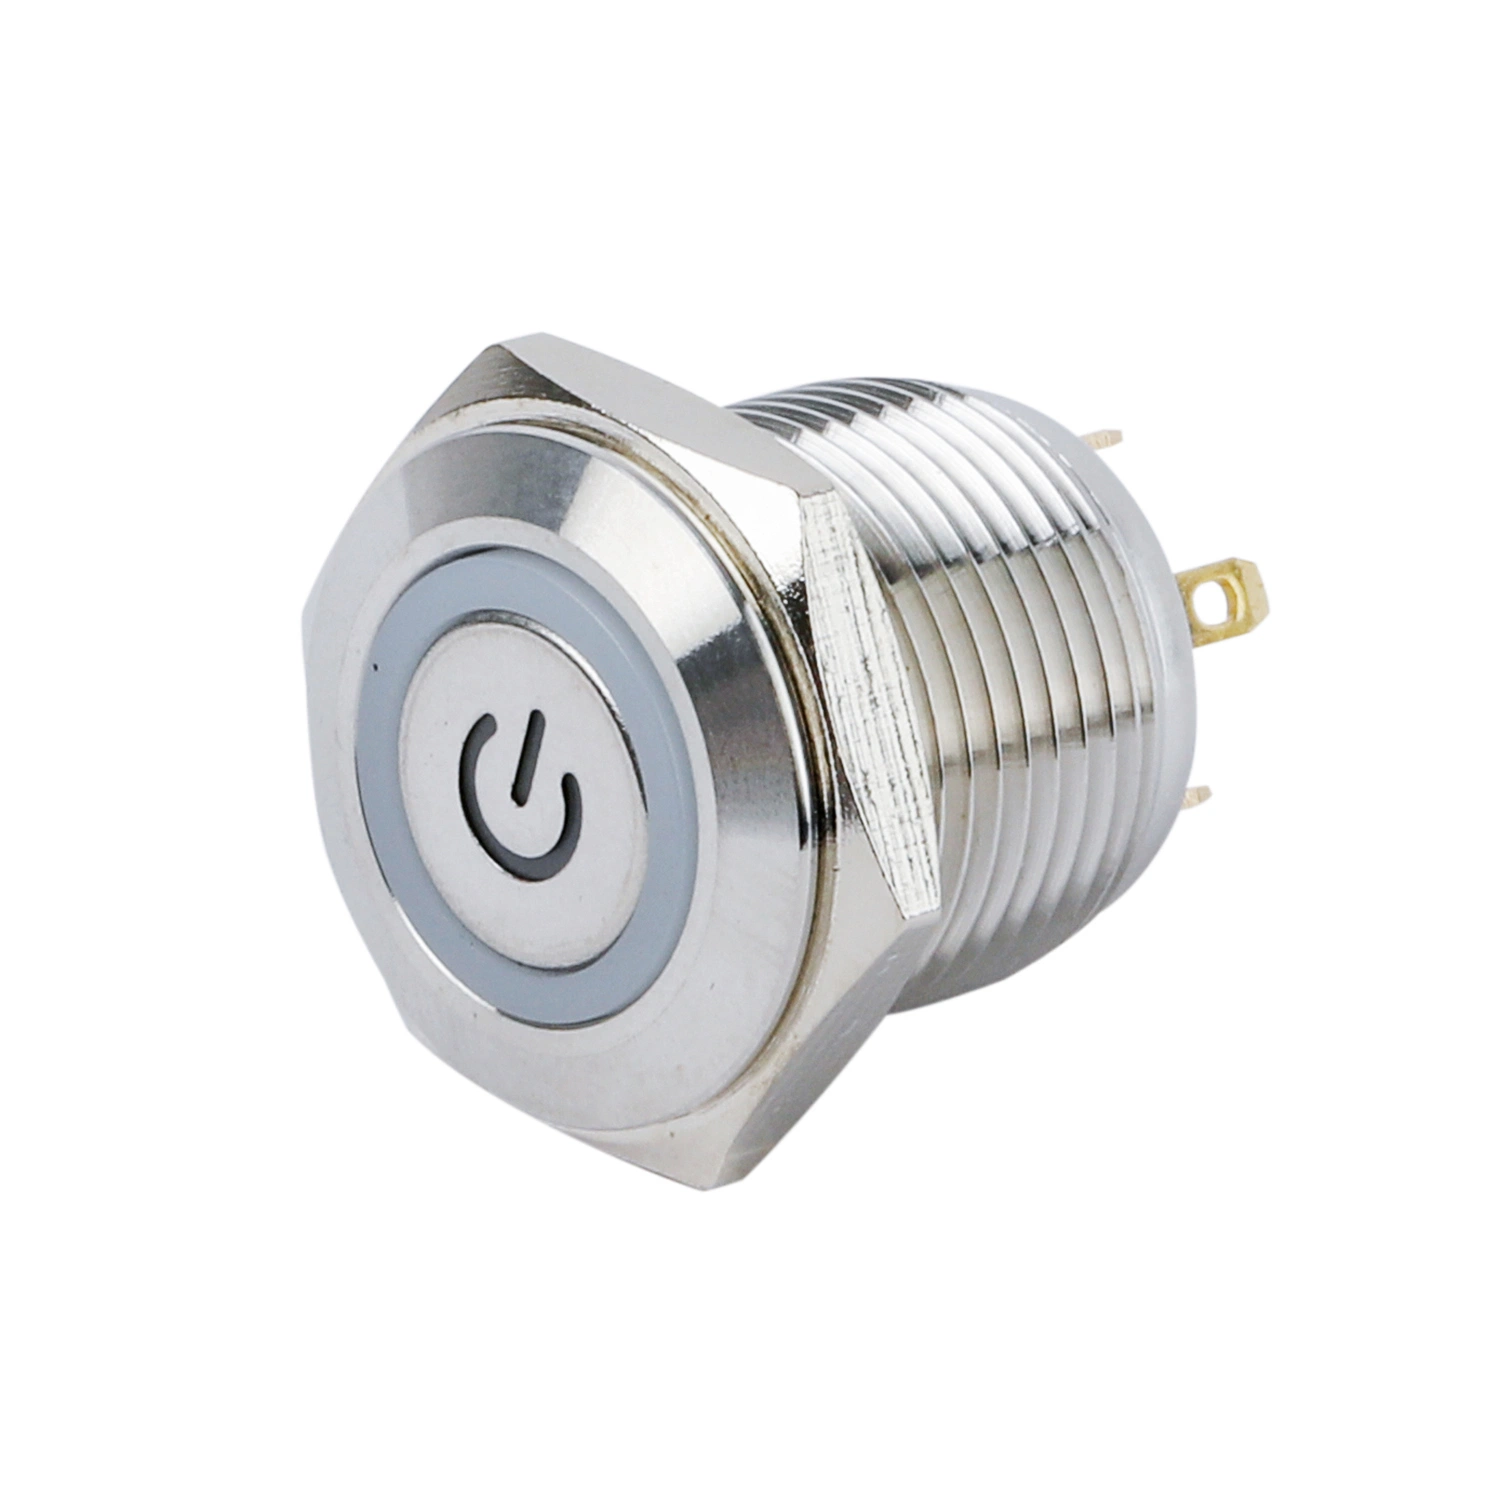 Qn16-D8 16mm Character Illuminated Type Momentary Flat Head Pin Terminal Waterproof Metal Push Button Switch